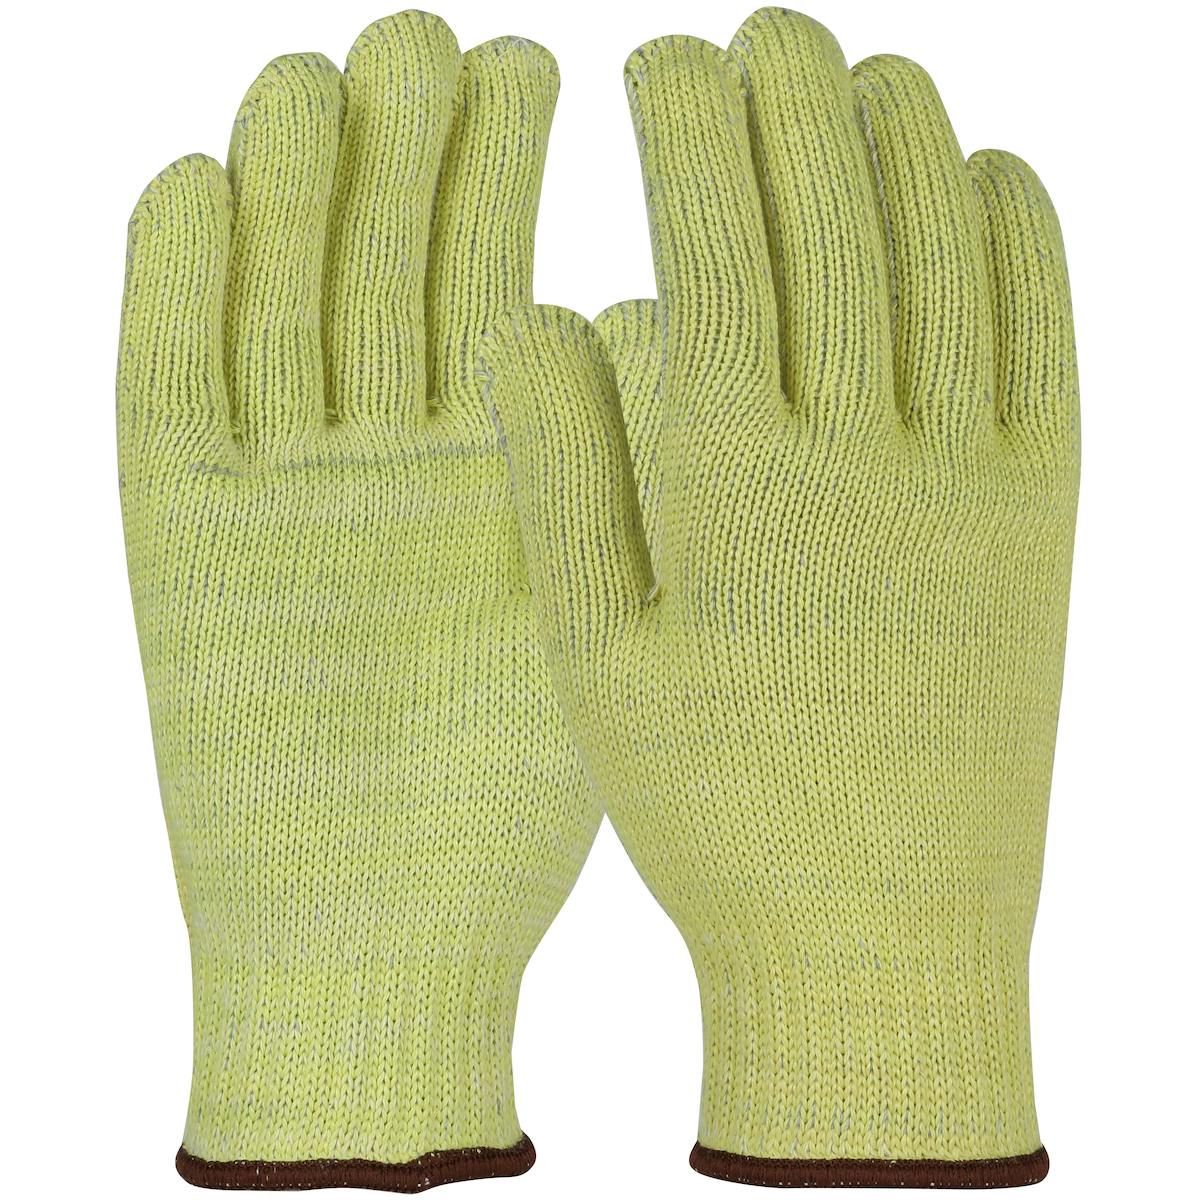 Kut Gard® Seamless Knit ATA® / Aramid Blended Glove with Cotton/Polyester Plating - Heavy Weight (MATA503)